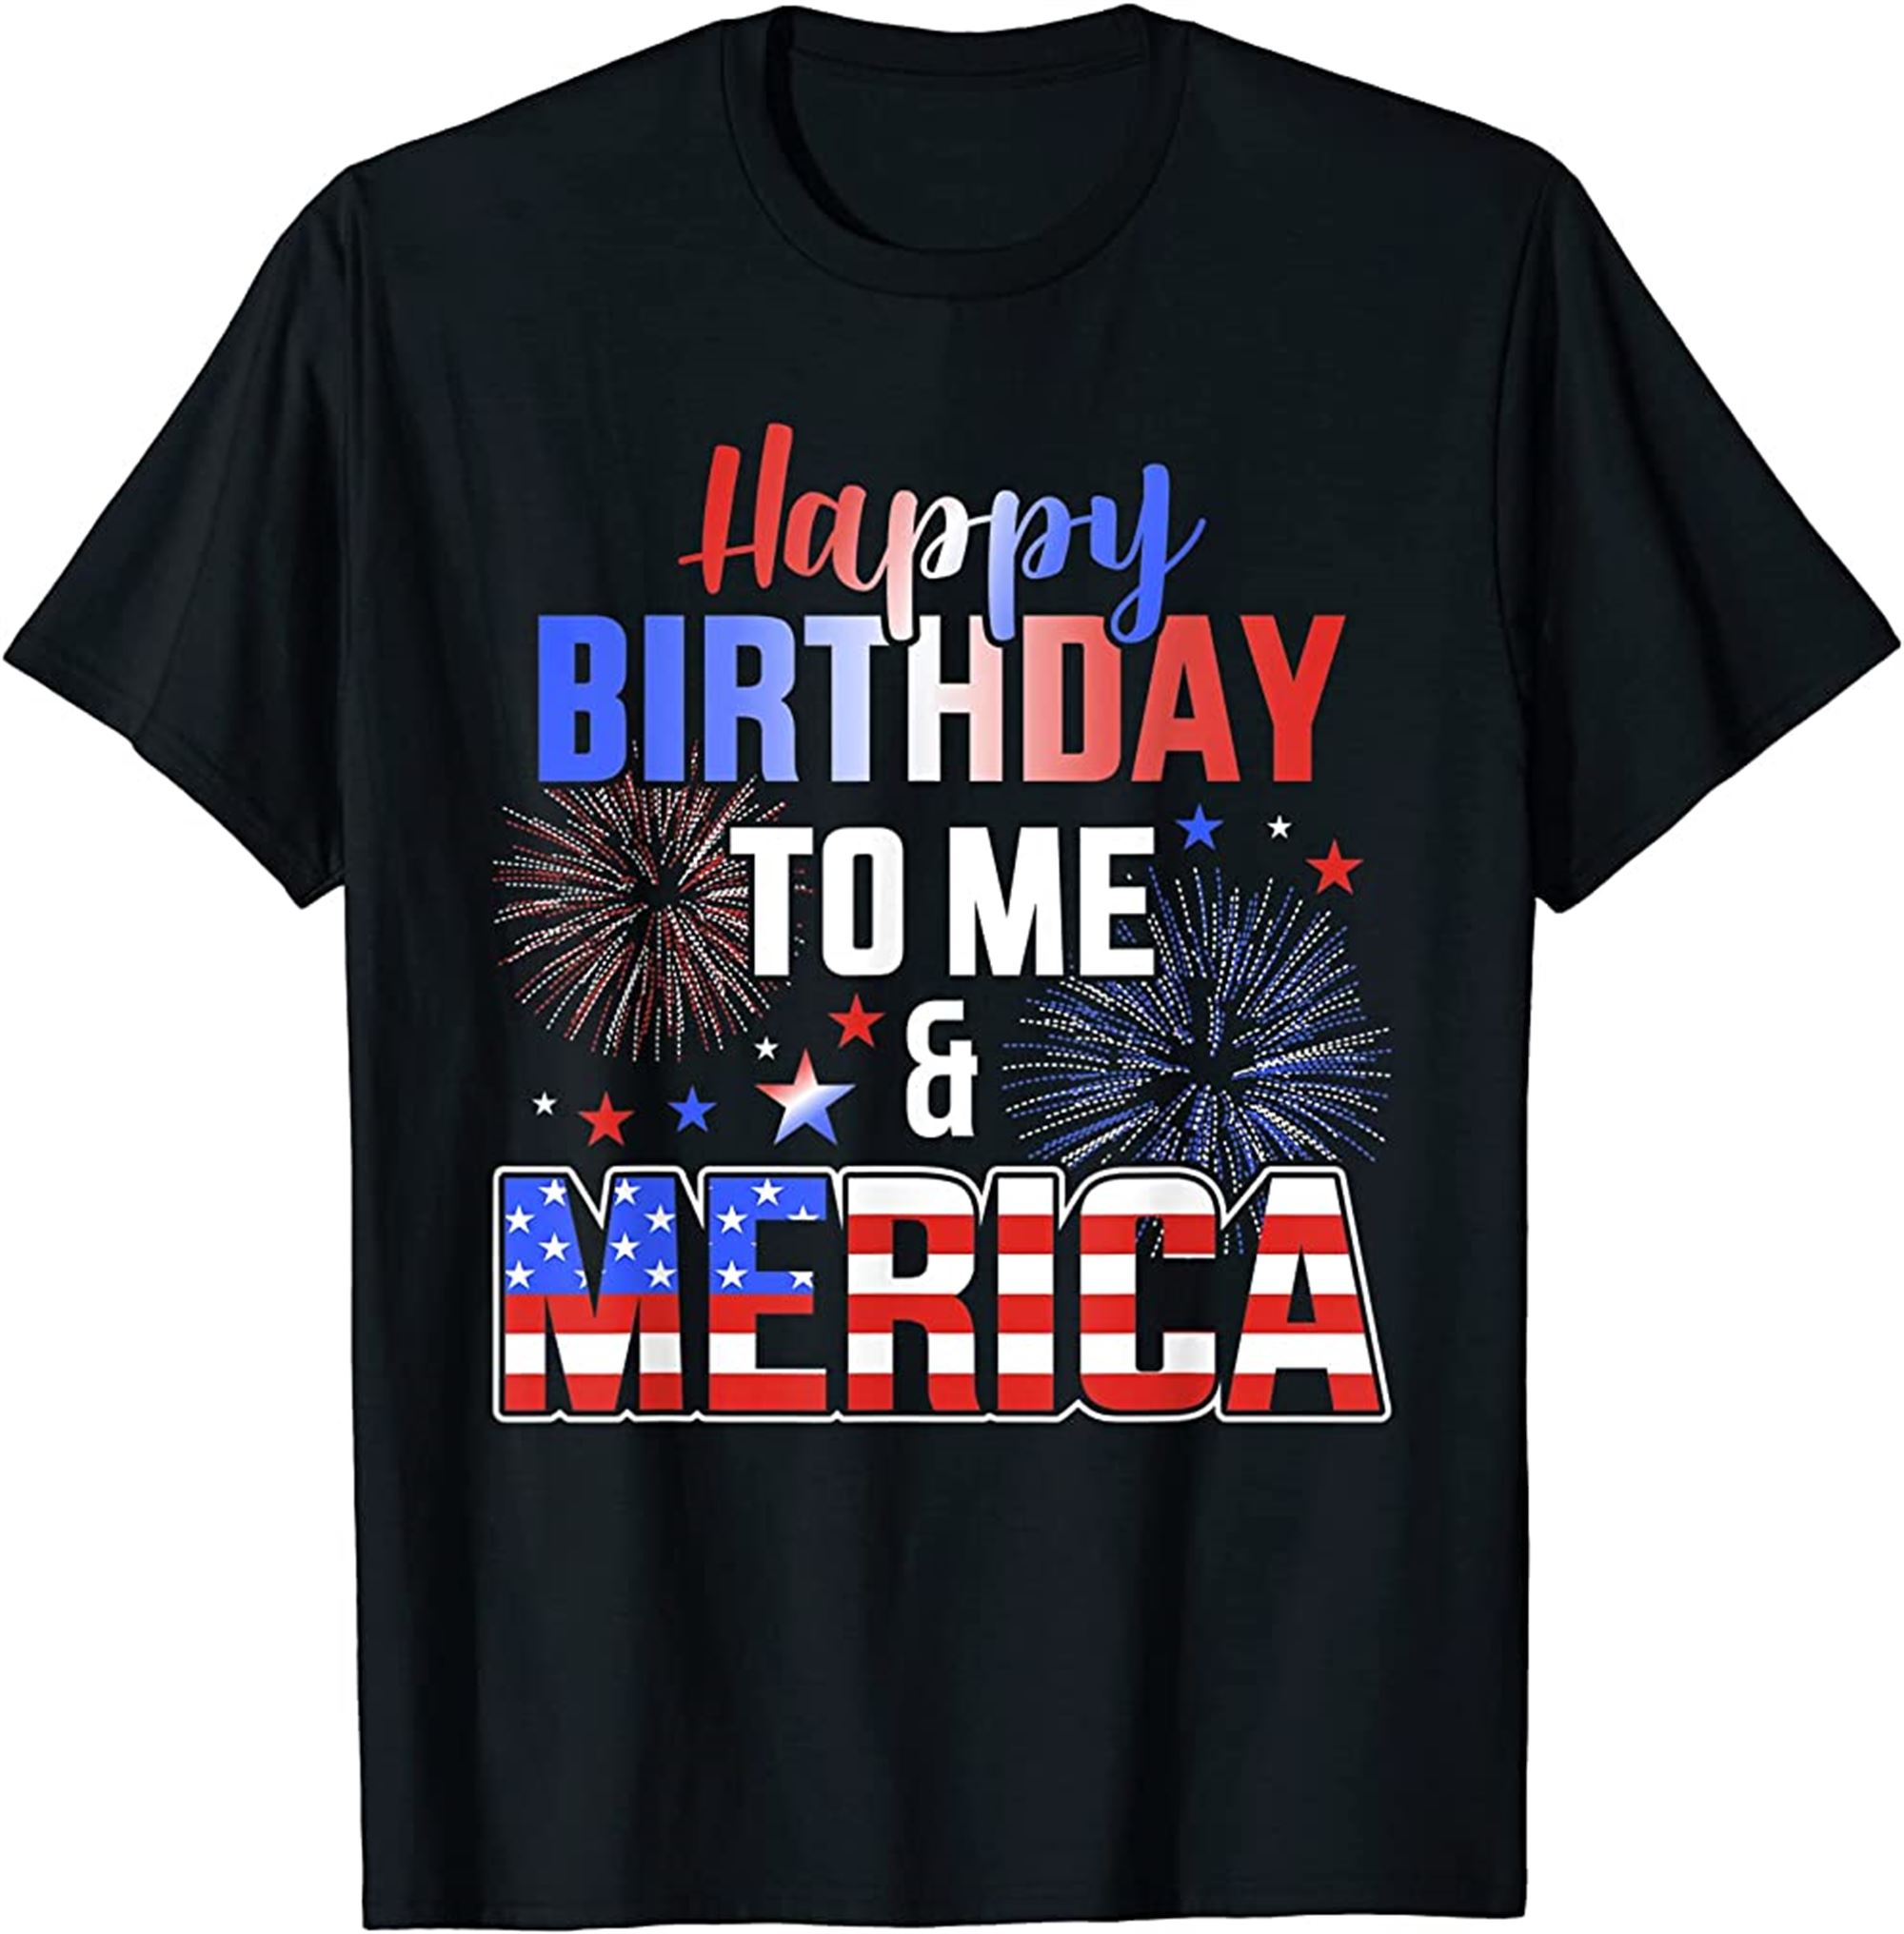 Happy Birthday To Me And Merica With Us Flag 4th Of July T-shirt Plus Size Up To 5xl